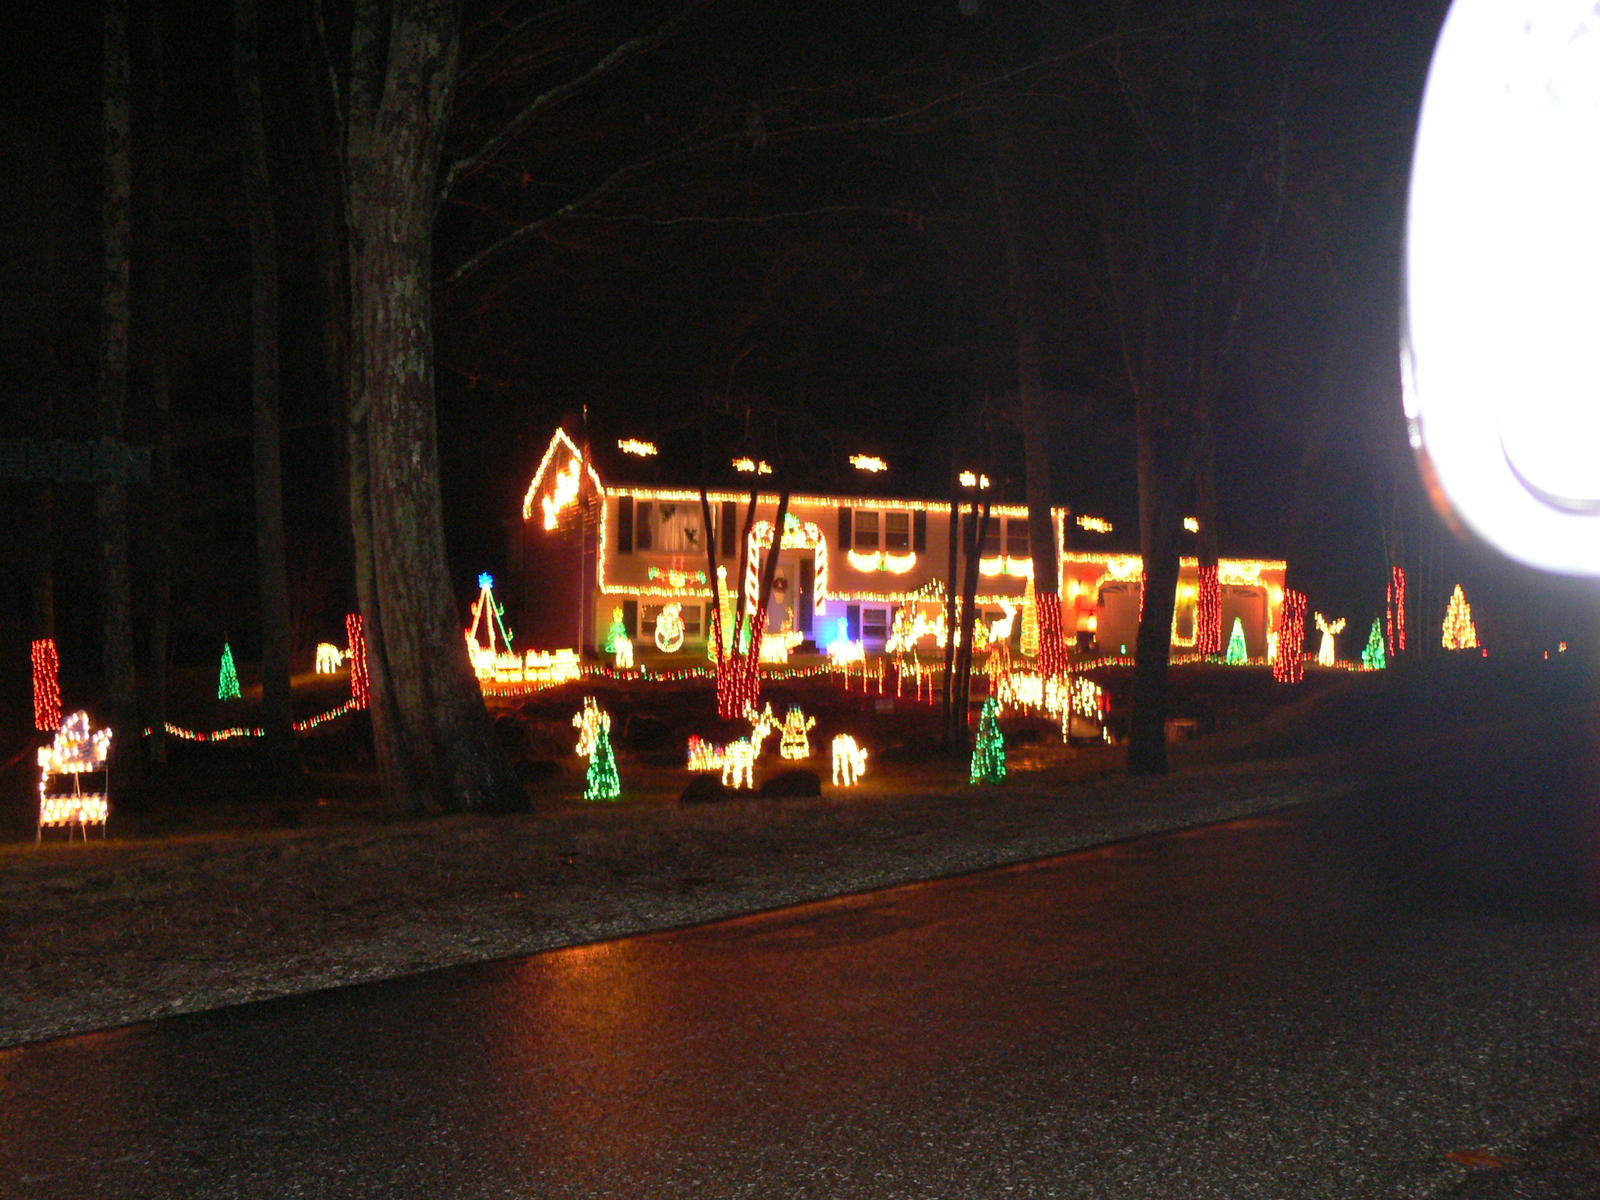 Best of New Hampshire's Christmas & Holiday Displays (Derry, Bedford